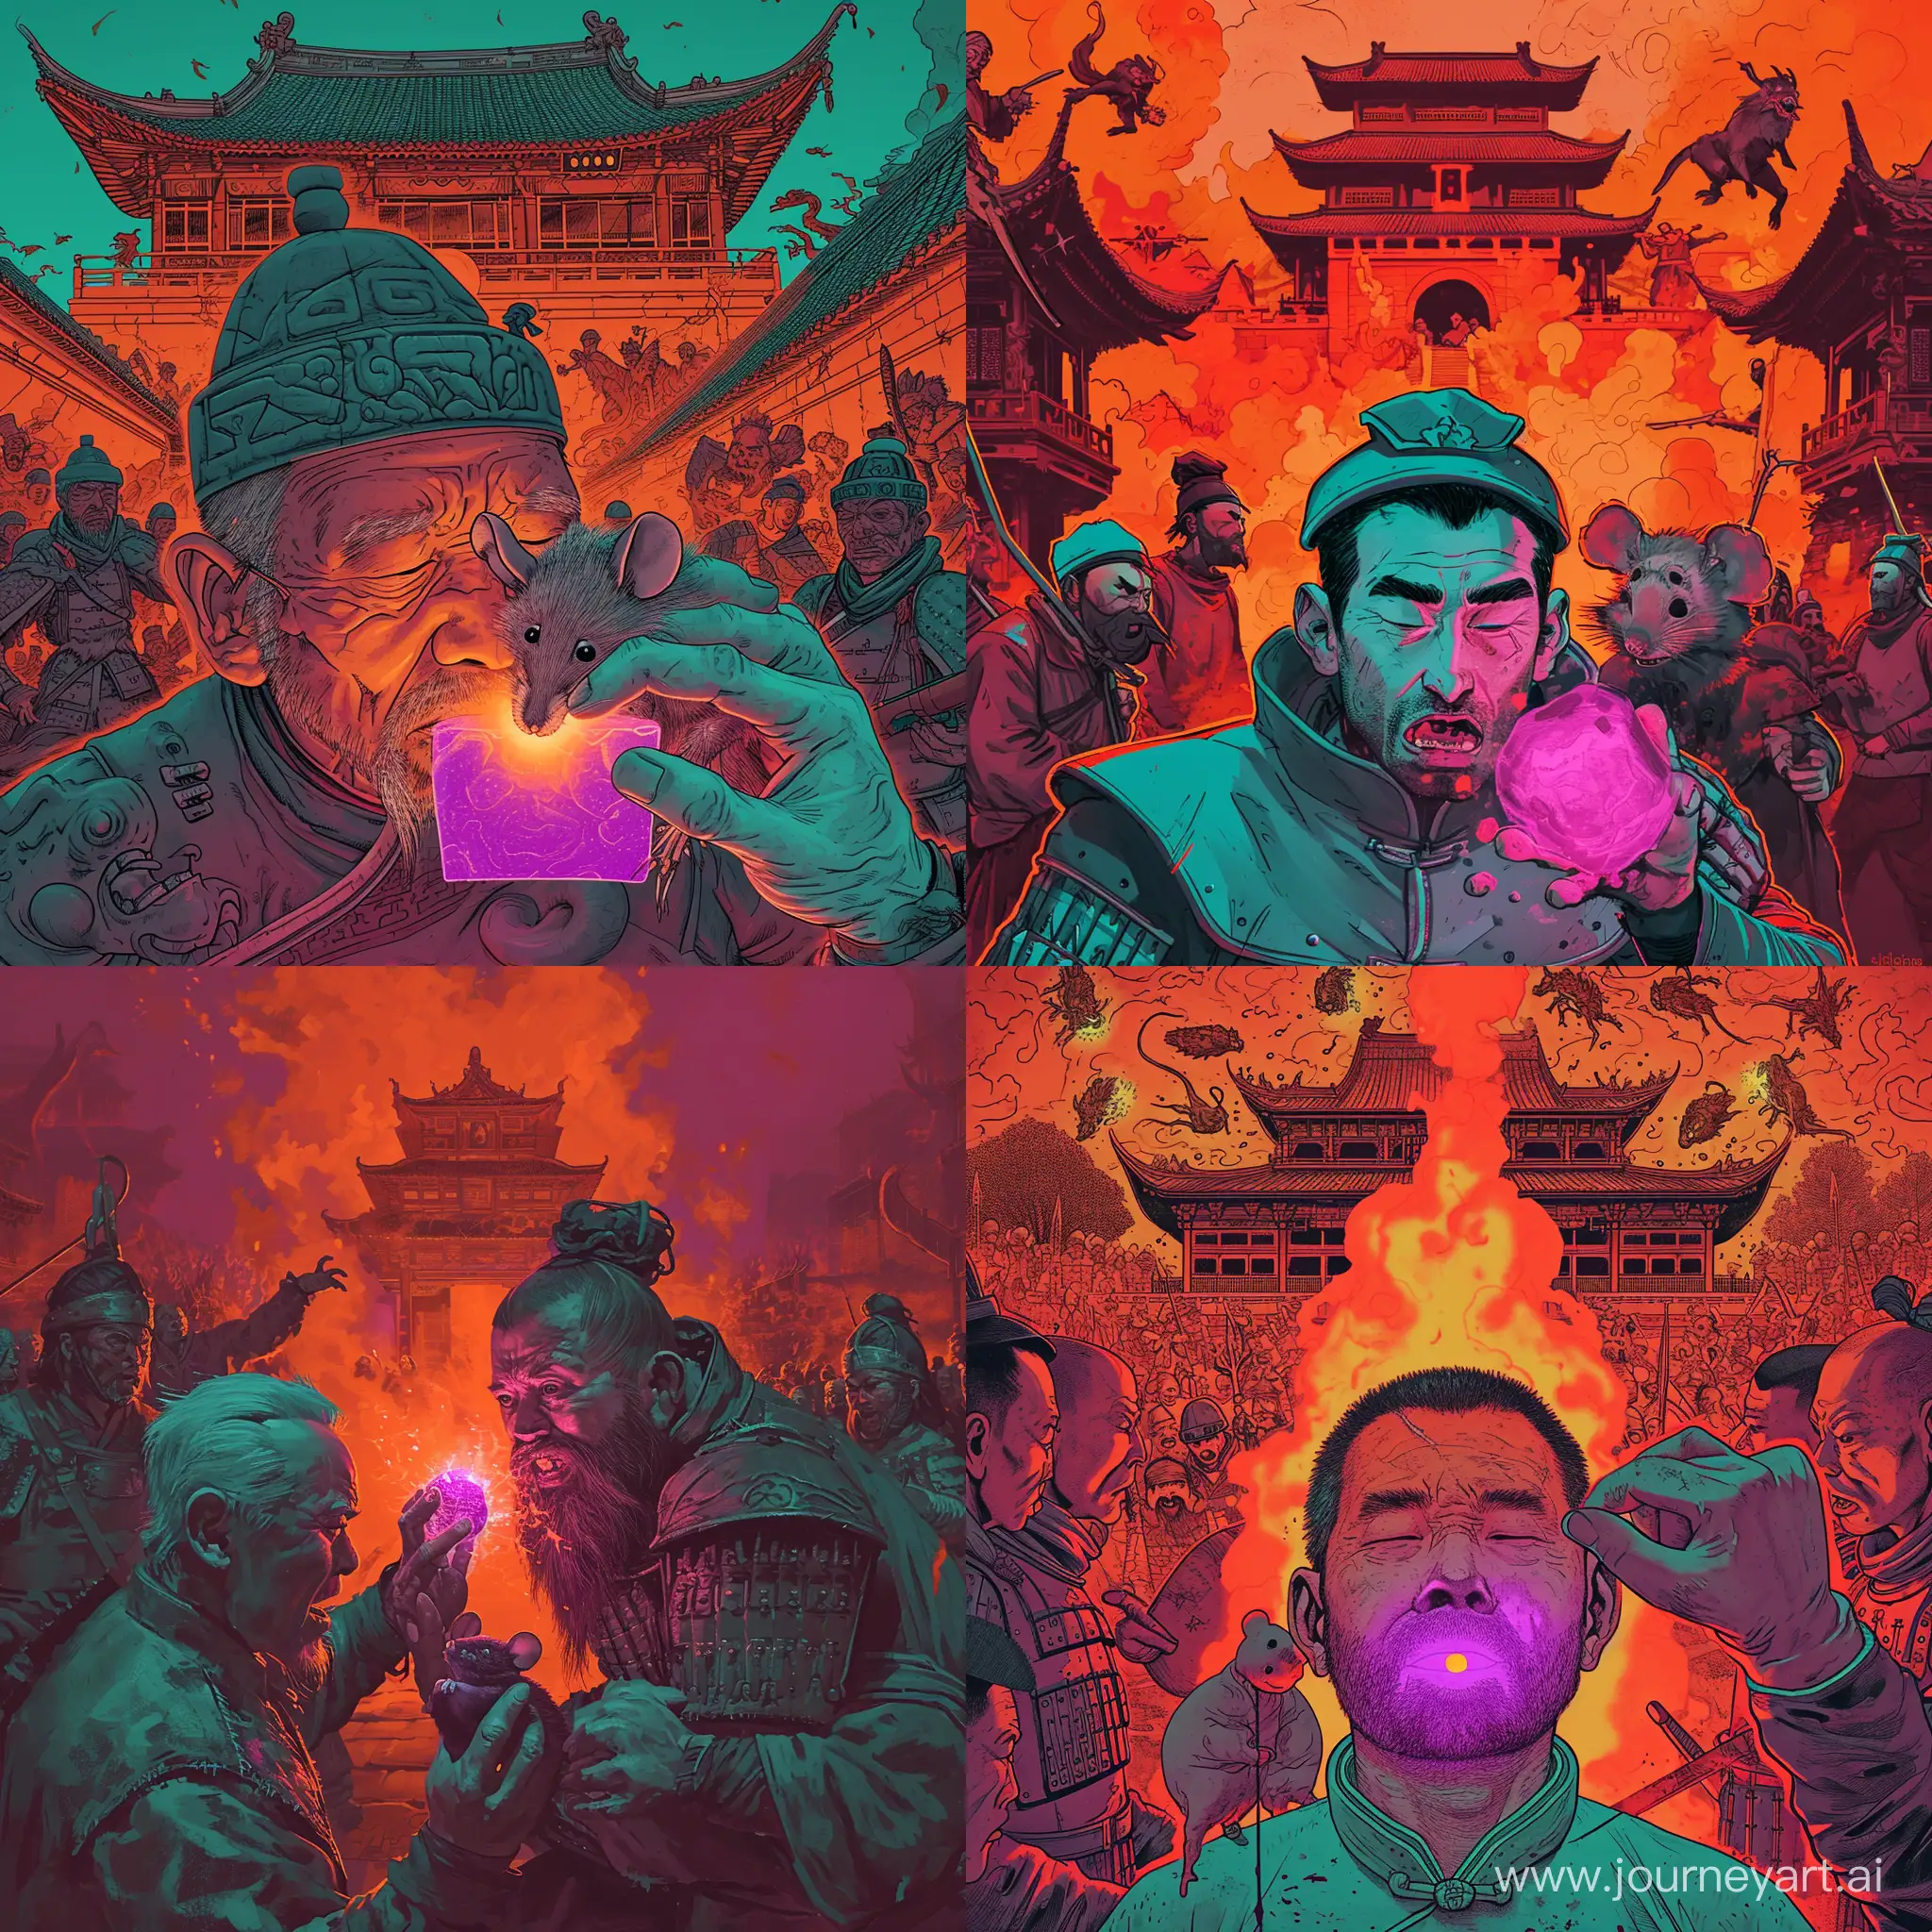 Art; firey red, deep orange and teal; serious. Background is a cult temple with many of irate cultists. A medieval Chinese solider presses a glowing purple and orange stone on the face of Charles Hoskinson, shrinking him to a mouse.